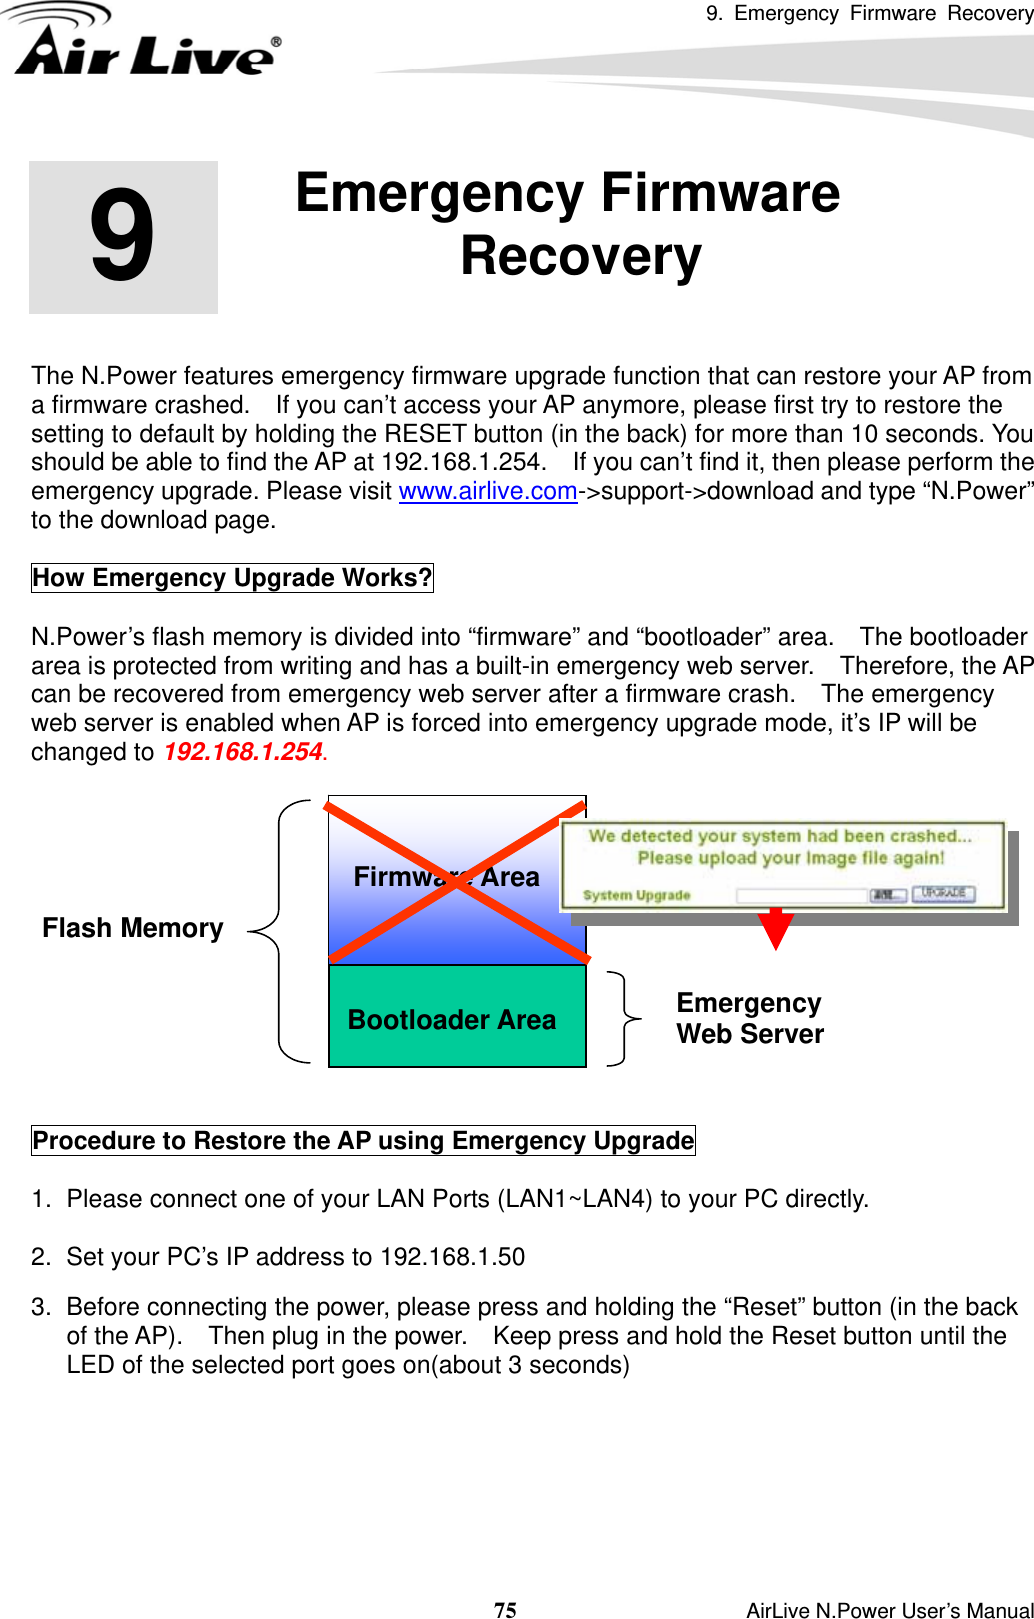 9. Emergency Firmware Recovery  75                    AirLive N.Power User’s Manual        The N.Power features emergency firmware upgrade function that can restore your AP from a firmware crashed.    If you can’t access your AP anymore, please first try to restore the setting to default by holding the RESET button (in the back) for more than 10 seconds. You should be able to find the AP at 192.168.1.254.    If you can’t find it, then please perform the emergency upgrade. Please visit www.airlive.com-&gt;support-&gt;download and type “N.Power” to the download page.  How Emergency Upgrade Works?    N.Power’s flash memory is divided into “firmware” and “bootloader” area.    The bootloader area is protected from writing and has a built-in emergency web server.   Therefore, the AP can be recovered from emergency web server after a firmware crash.    The emergency web server is enabled when AP is forced into emergency upgrade mode, it’s IP will be changed to 192.168.1.254.     Procedure to Restore the AP using Emergency Upgrade  1.  Please connect one of your LAN Ports (LAN1~LAN4) to your PC directly.    2.  Set your PC’s IP address to 192.168.1.50    3.  Before connecting the power, please press and holding the “Reset” button (in the back of the AP).    Then plug in the power.    Keep press and hold the Reset button until the LED of the selected port goes on(about 3 seconds)    9  9. Emergency Firmware Recovery  Bootloader Area Flash Memory Emergency  Web Server Firmware Area 